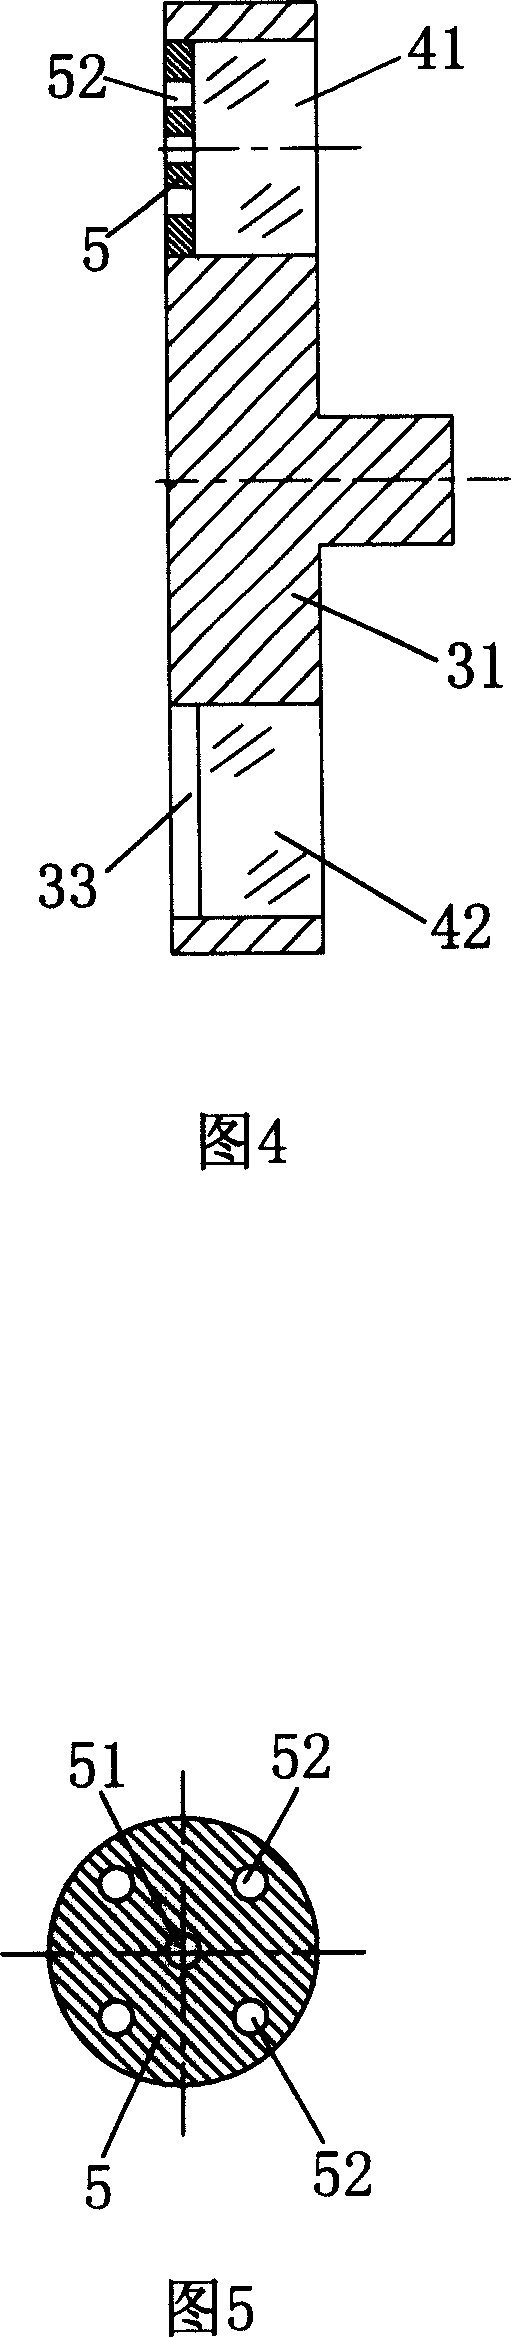 Enzyme mark instrument spectrophotometric detecting optical system, and light diaphragm and optical filter wheel thereof